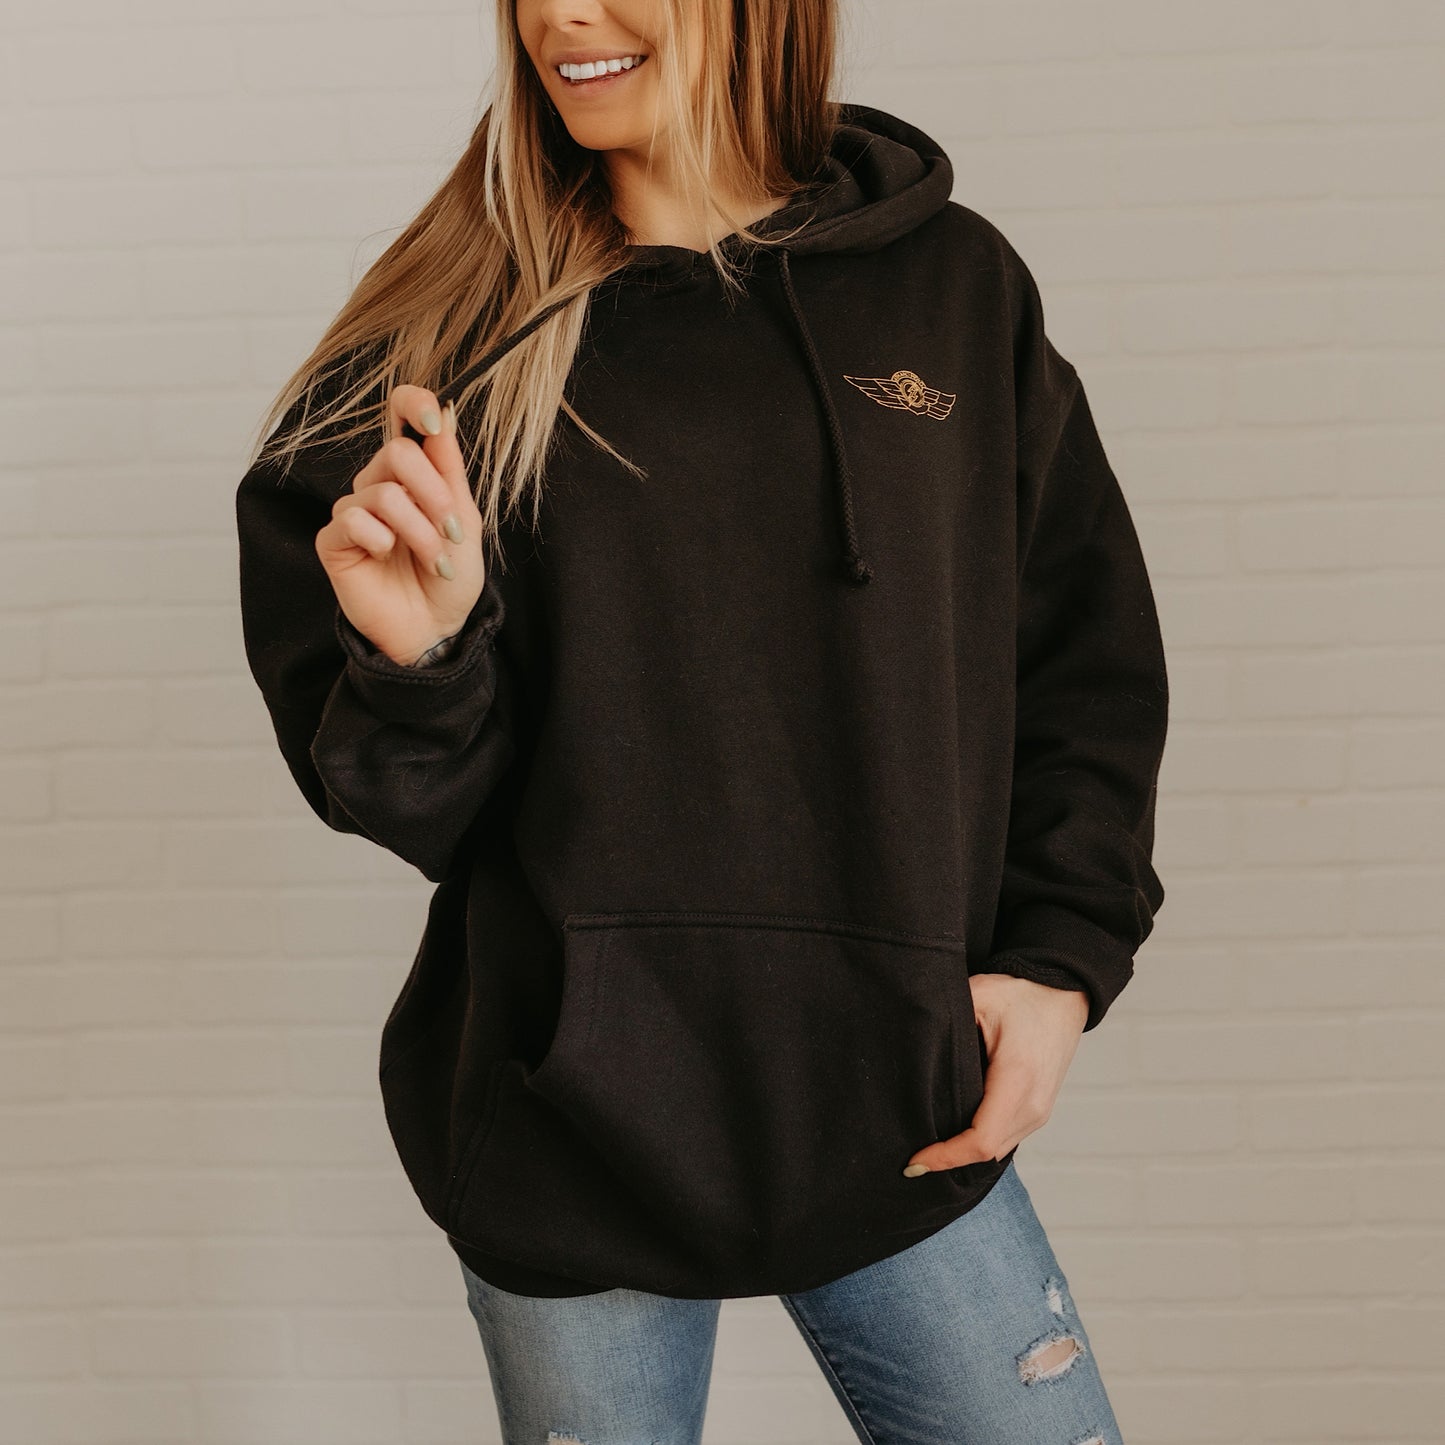 GET OUT OF TOWN - UNISEX HOODIE